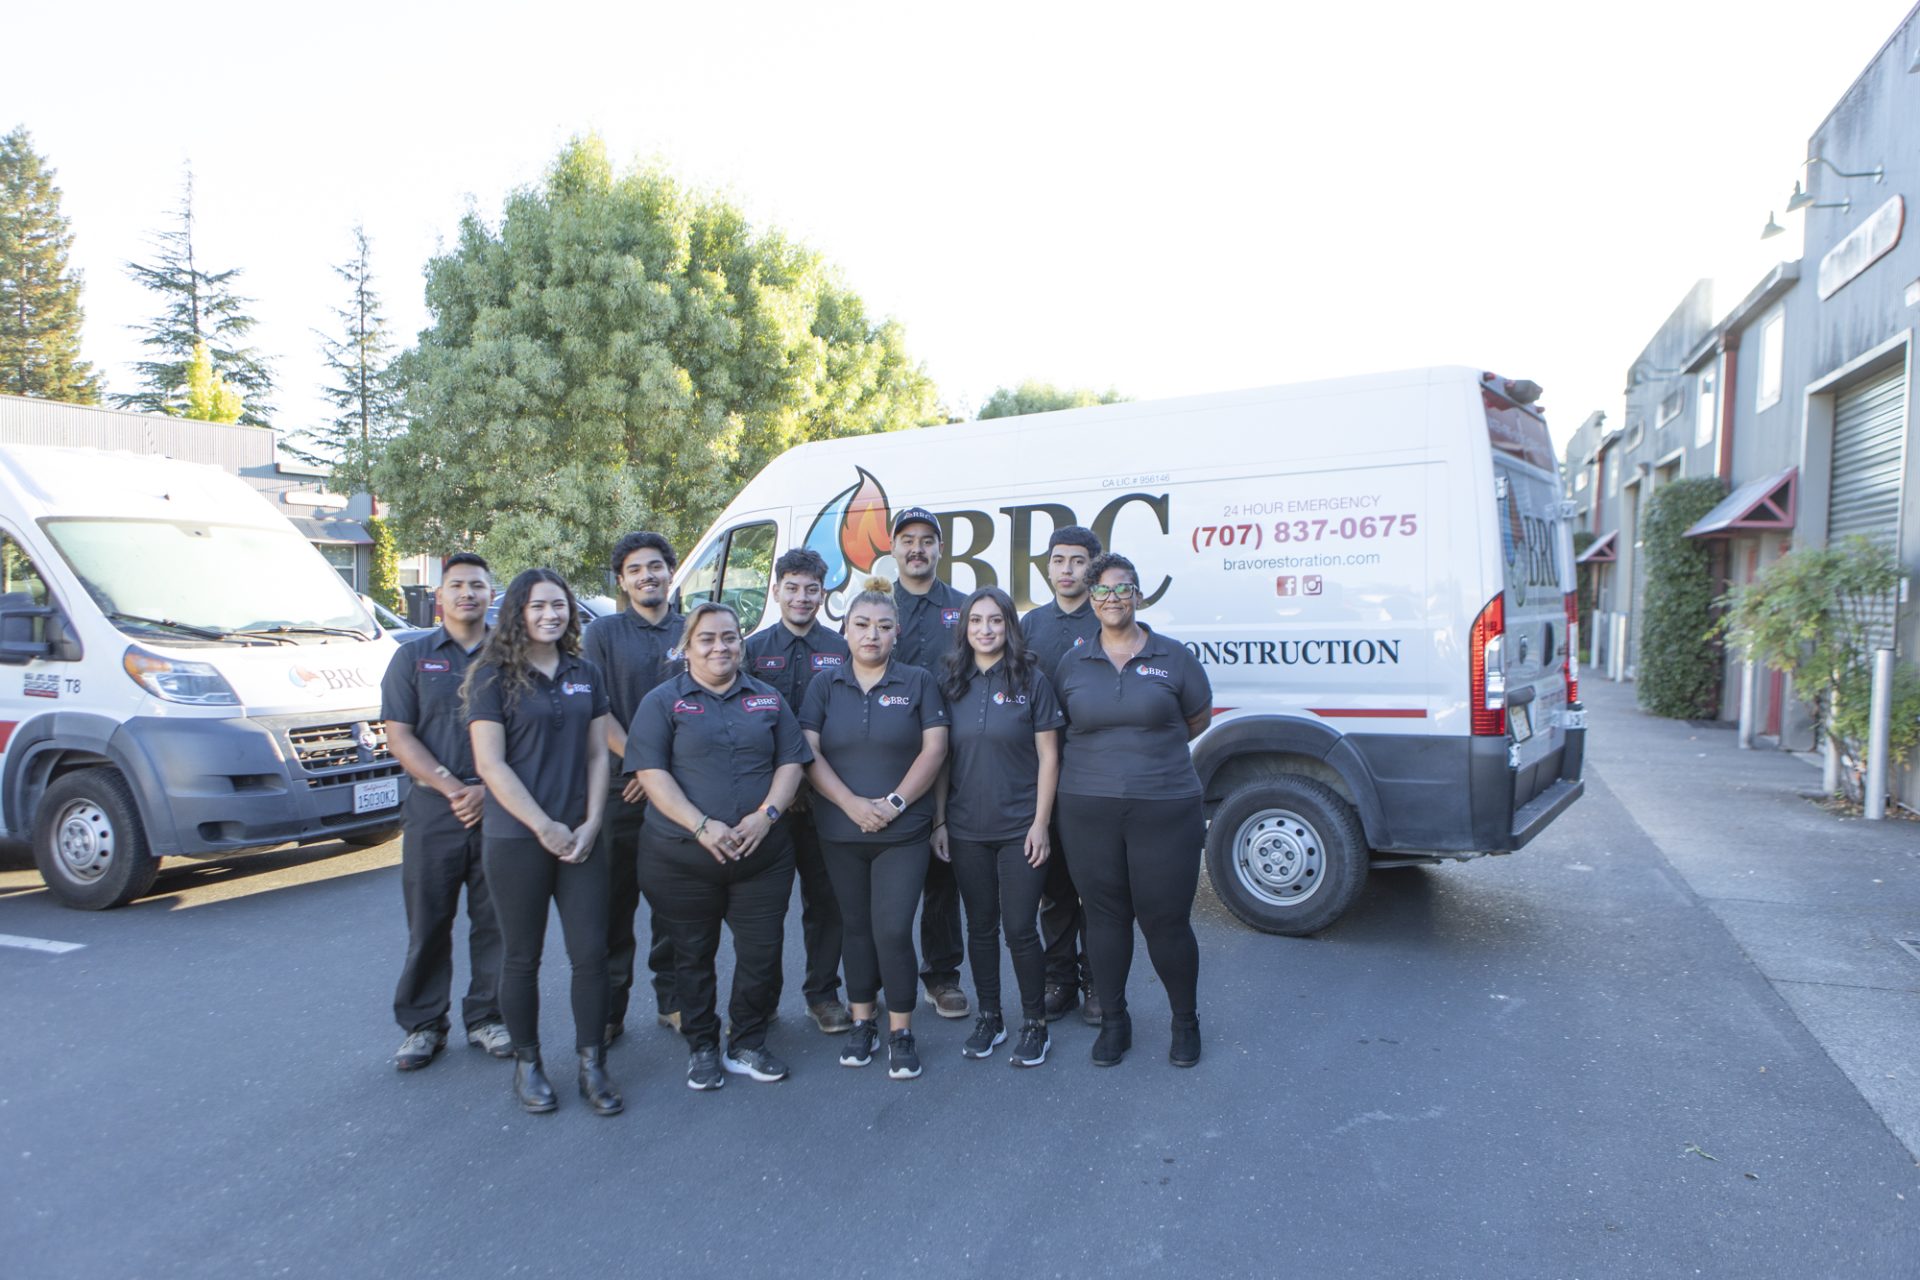 A group of bravo restoration experts standing in front of a van.